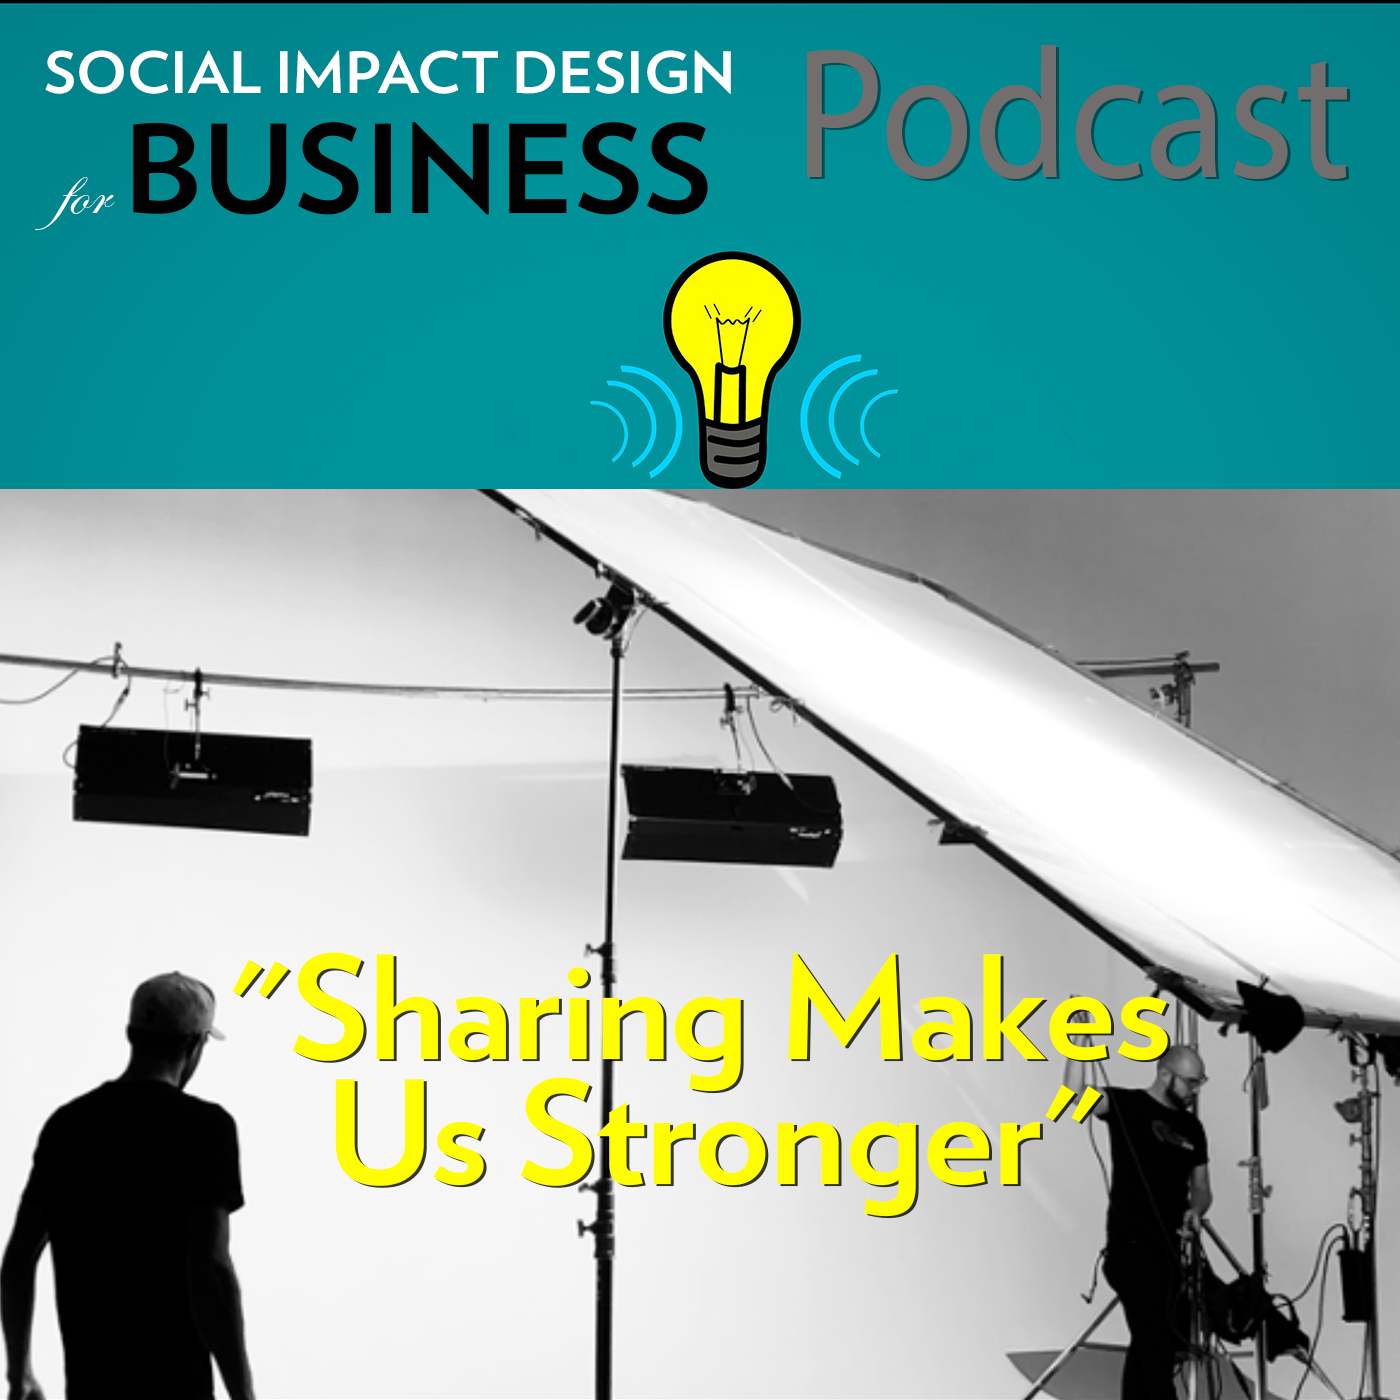 Podcast: Sharing Makes Us Stronger